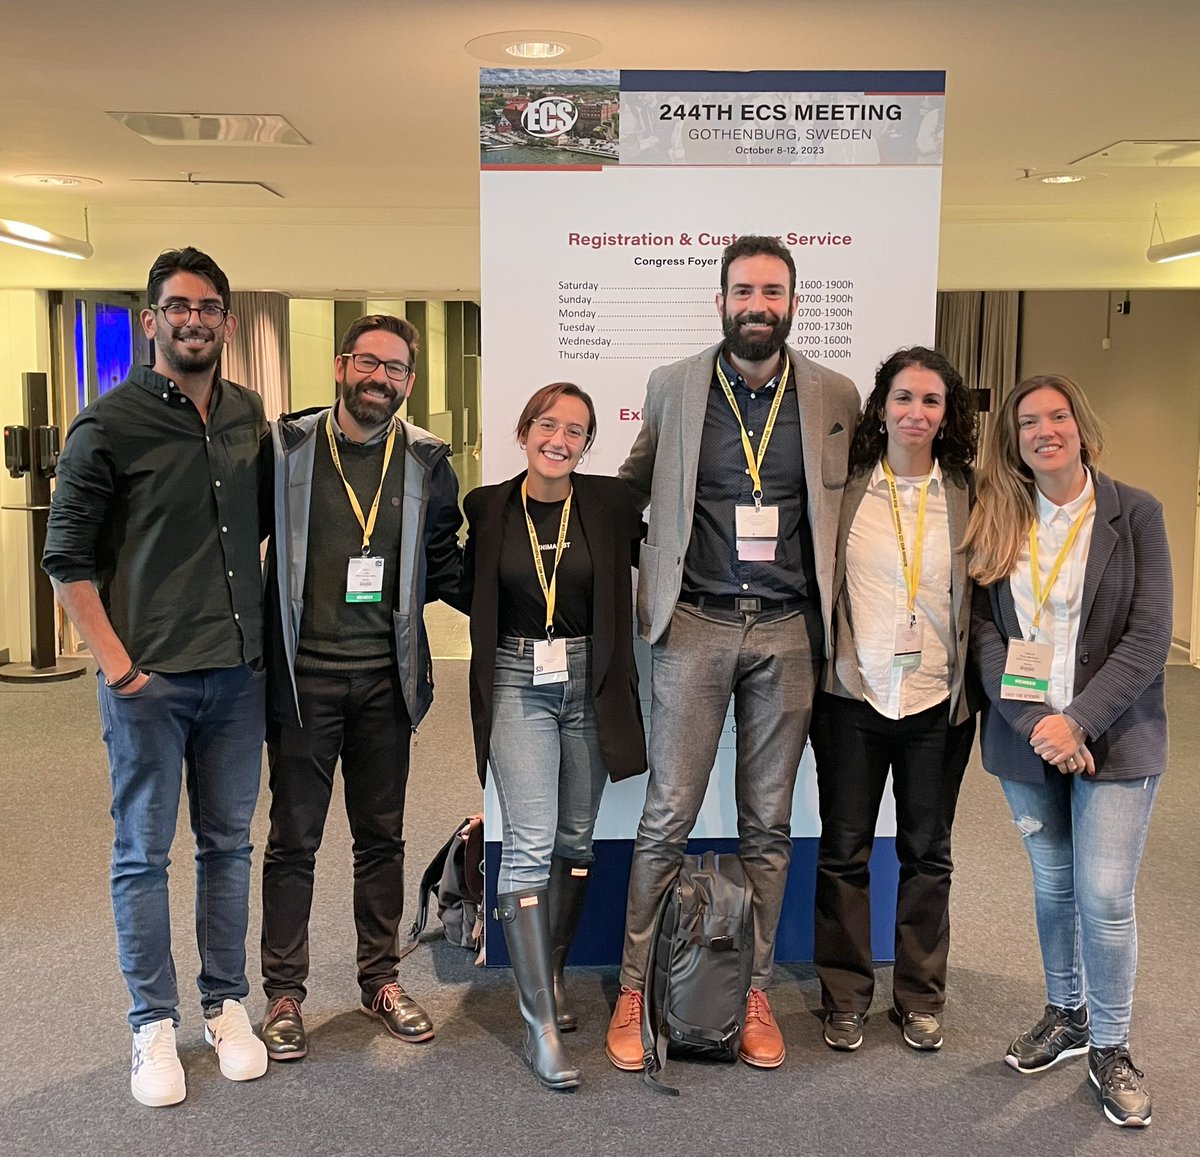 🔬 Just wrapped up an amazing 5 days at the 244th Electrochemical Society Conference in Gothenburg! 🇸🇪 Presented my research, connected with brilliant minds, and learned a ton. Huge shoutout to my awesome group @EcpuEnergy and the organizers @ECSorg !  #ECS244 #ResearchHighlight